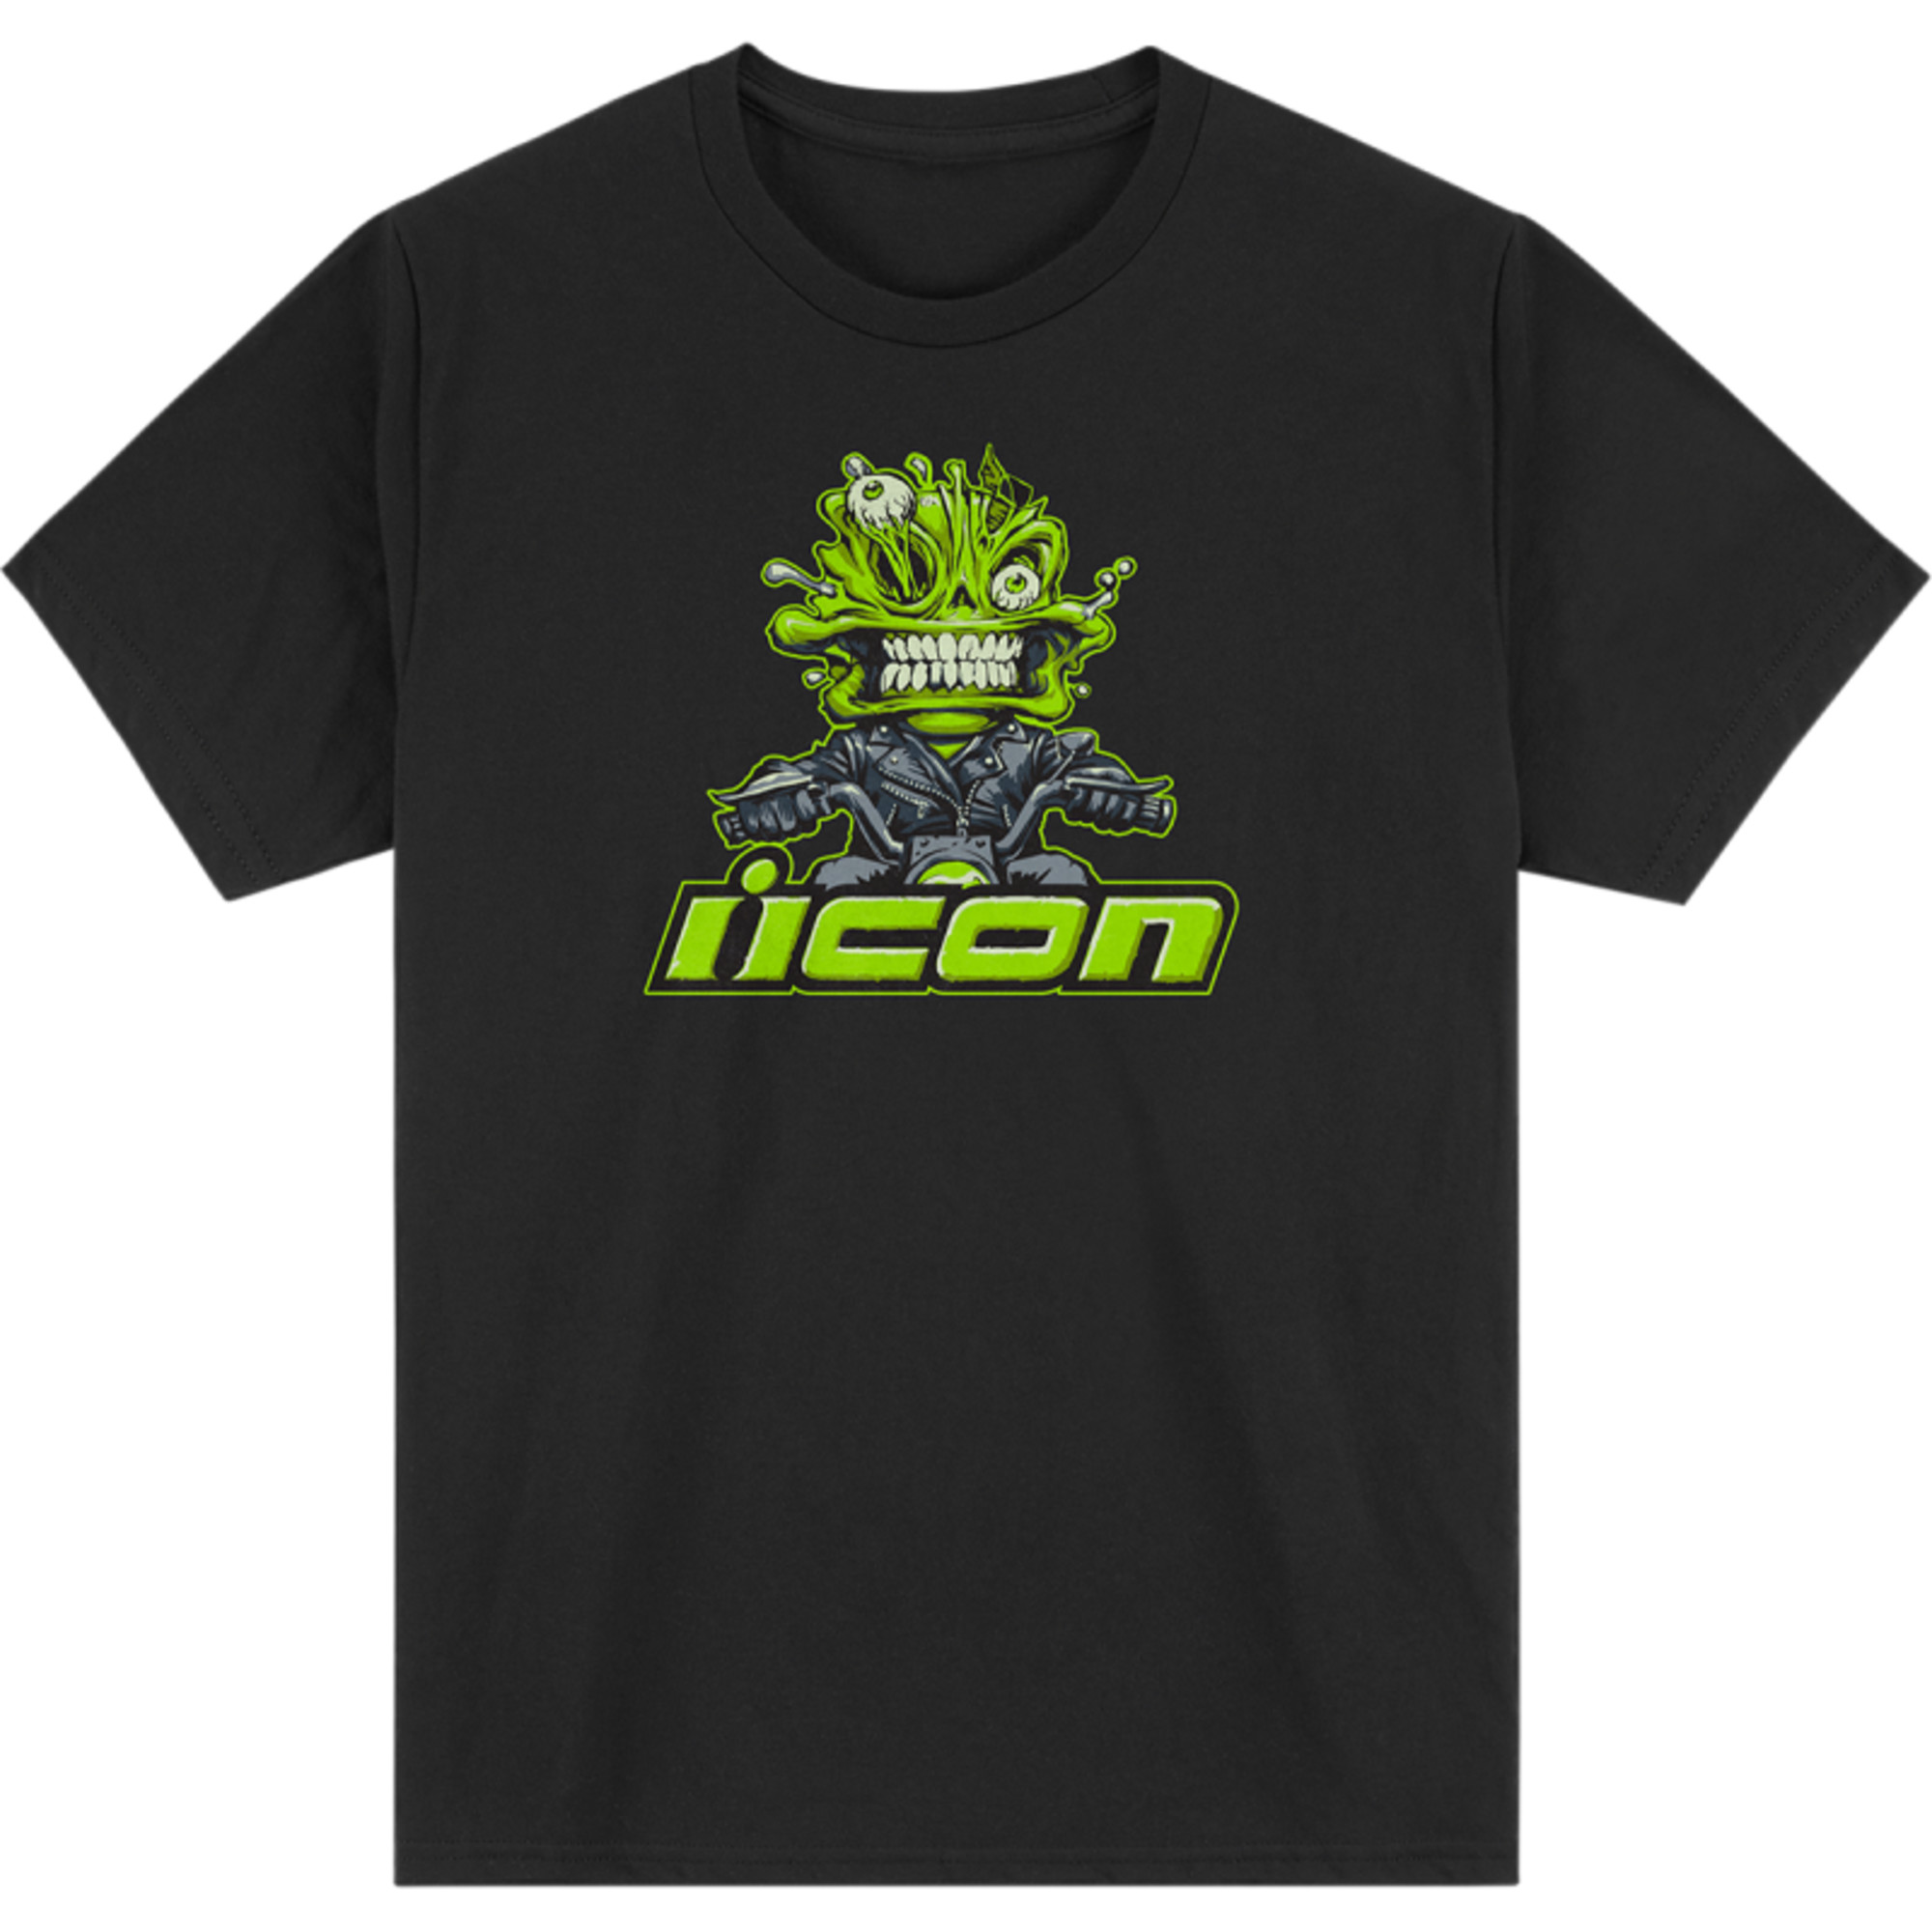 icon t-shirt shirts for men facelift freddy